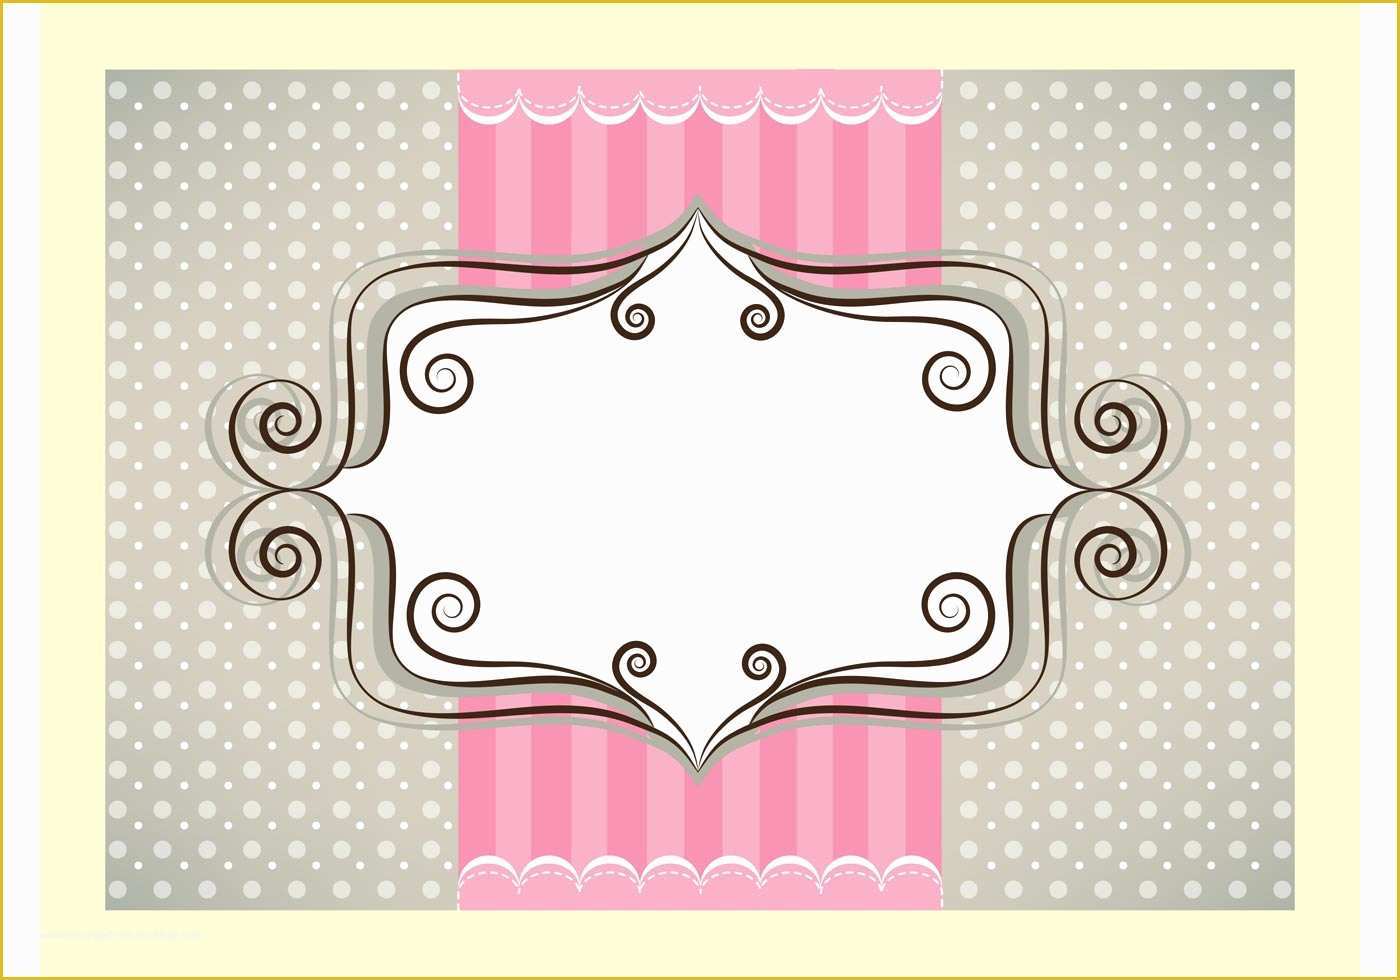 Girly Business Cards Templates Free Of Cute Greeting Card Download Free Vector Art Stock